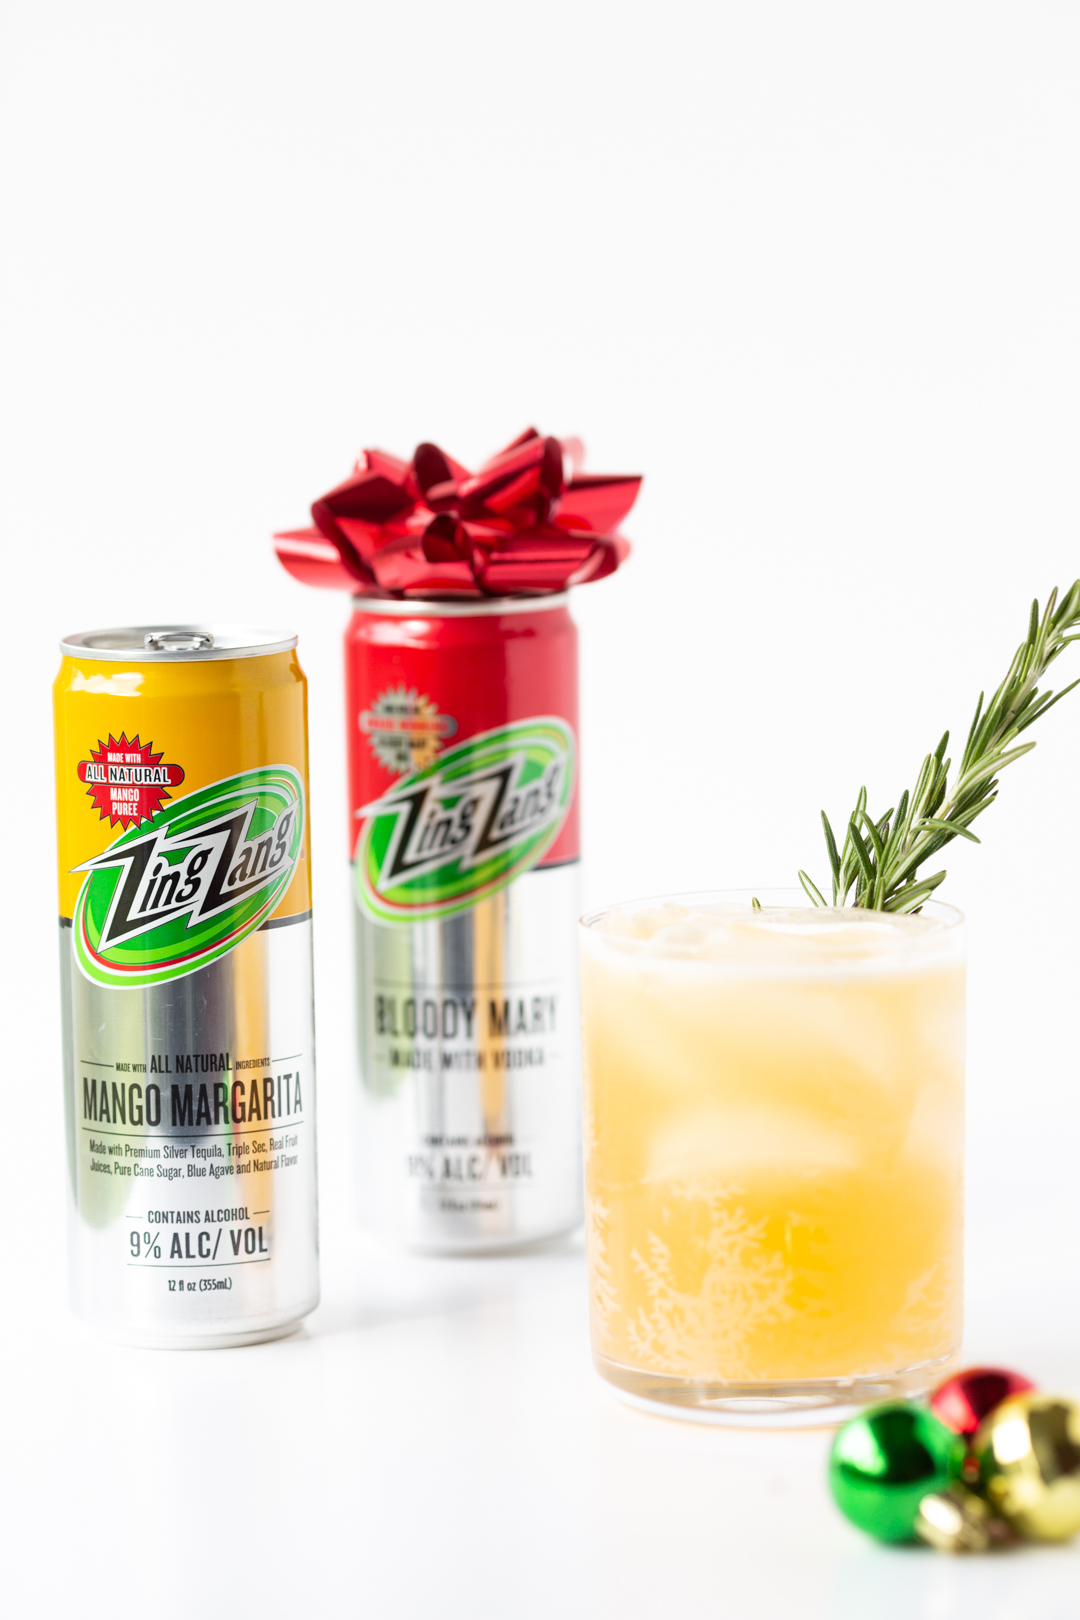 Zing Zang® cocktail cans and mango margarita served in a small festive glass with a spring of fresh rosemary
